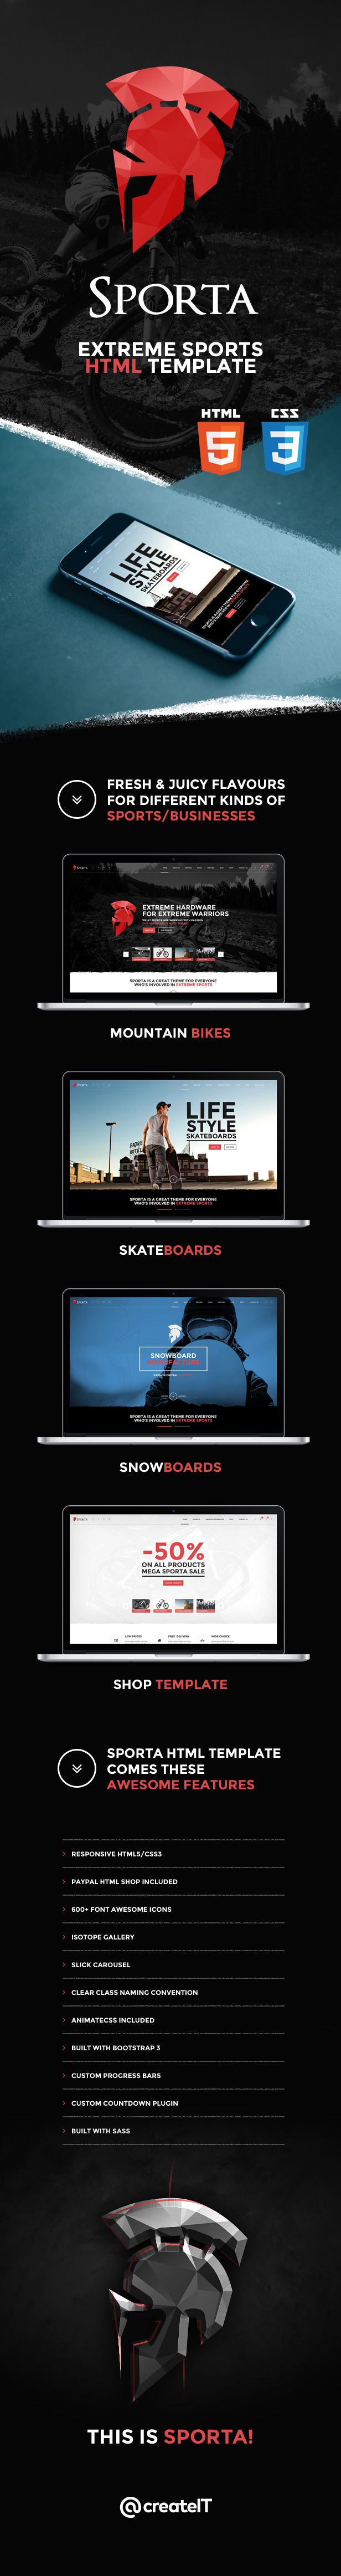 Sporta - Extreme Sports, Manufacture HTML Template - 7